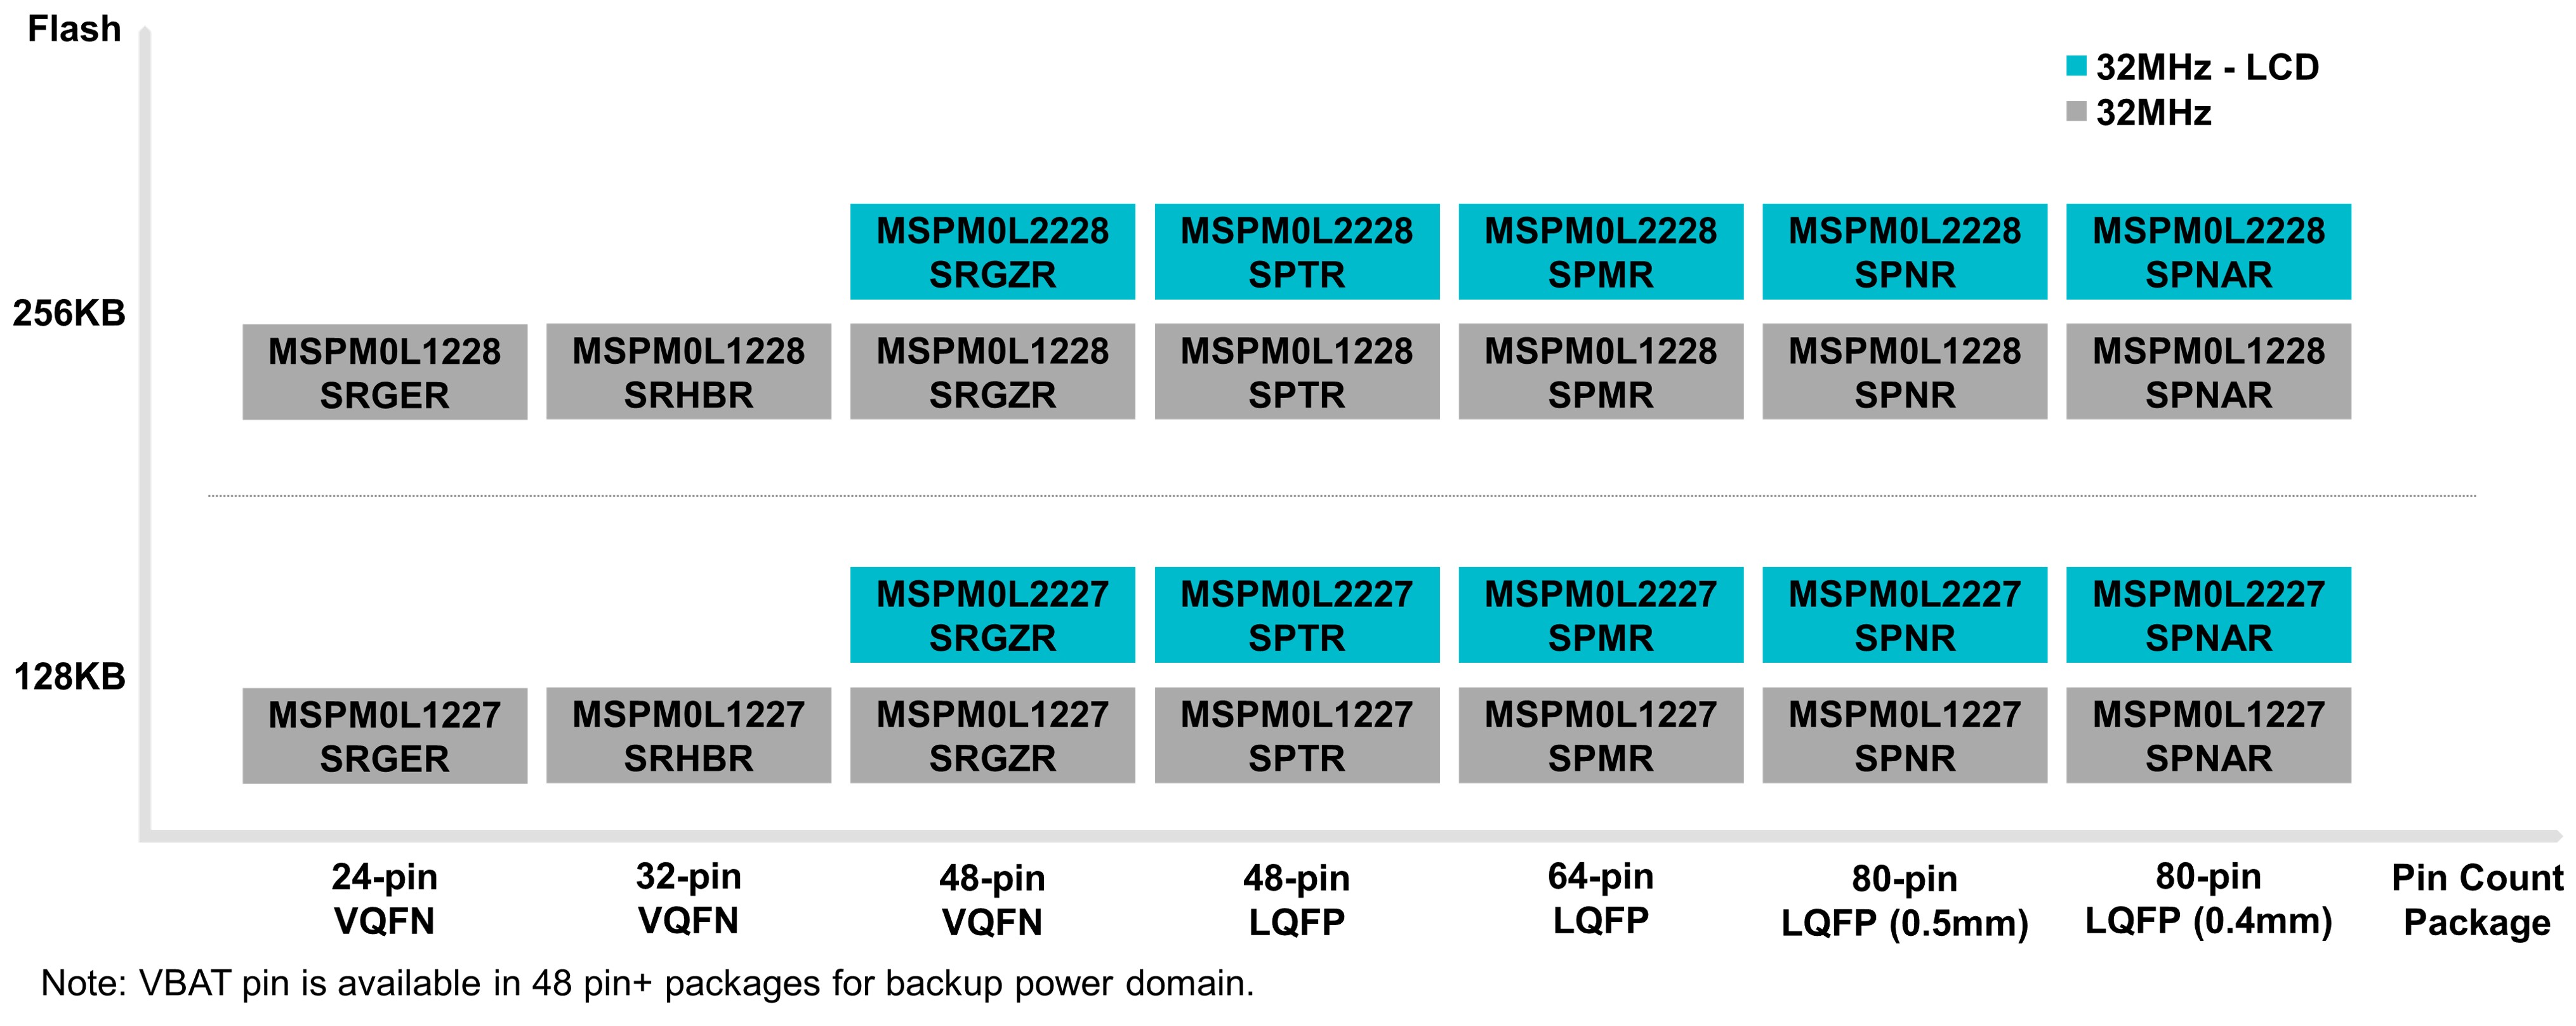  Selection Table of MSPM0Lx22x Microcontrollers